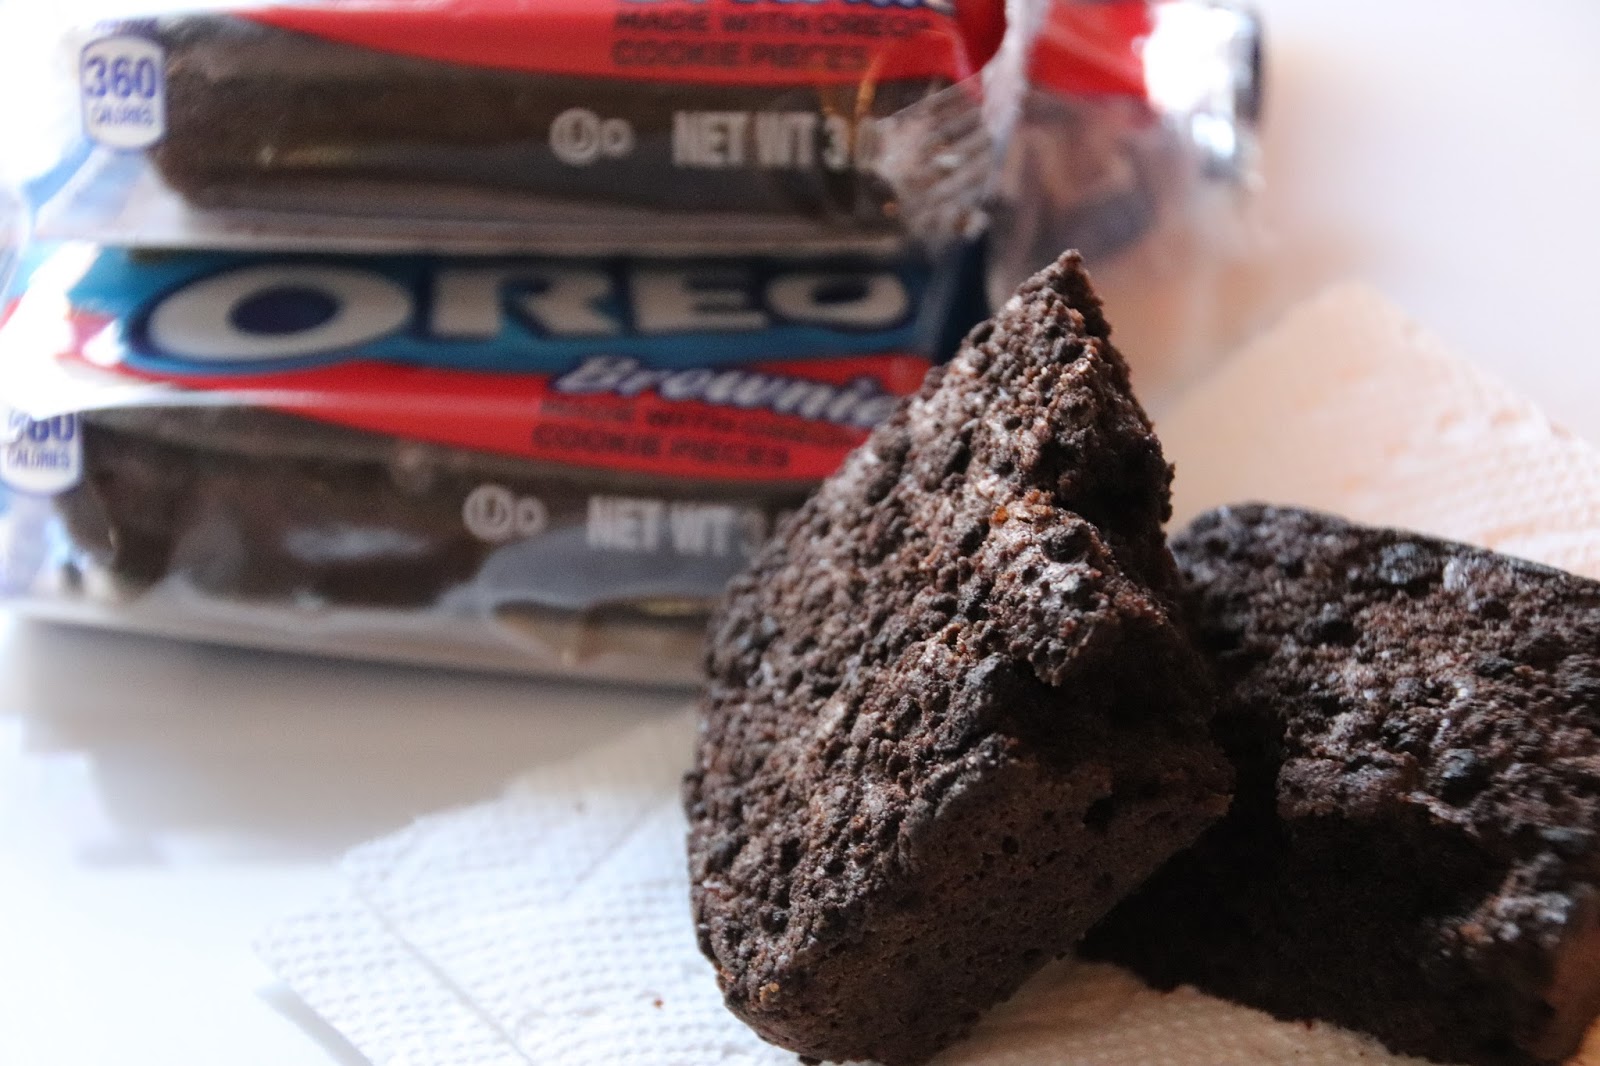 Susan's Disney Family: Chocolate lovers! There is a new Mrs. Freshley's Brownie made with OREO ...